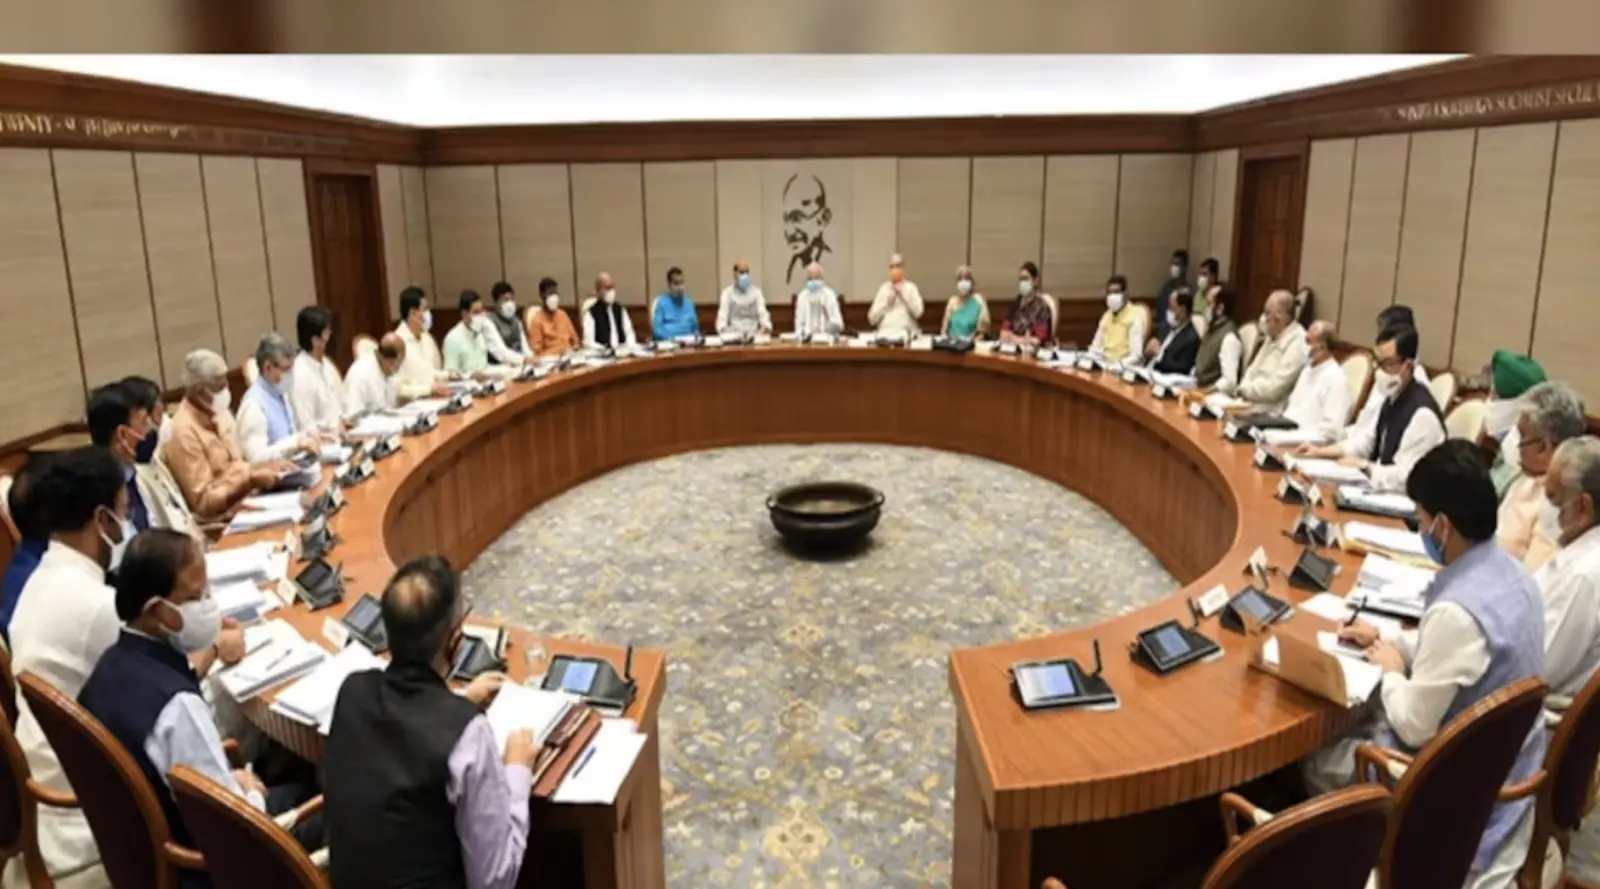 16th Finance Commission: Cabinet approves creation of three posts, including one economic advisor and two joint secretaries